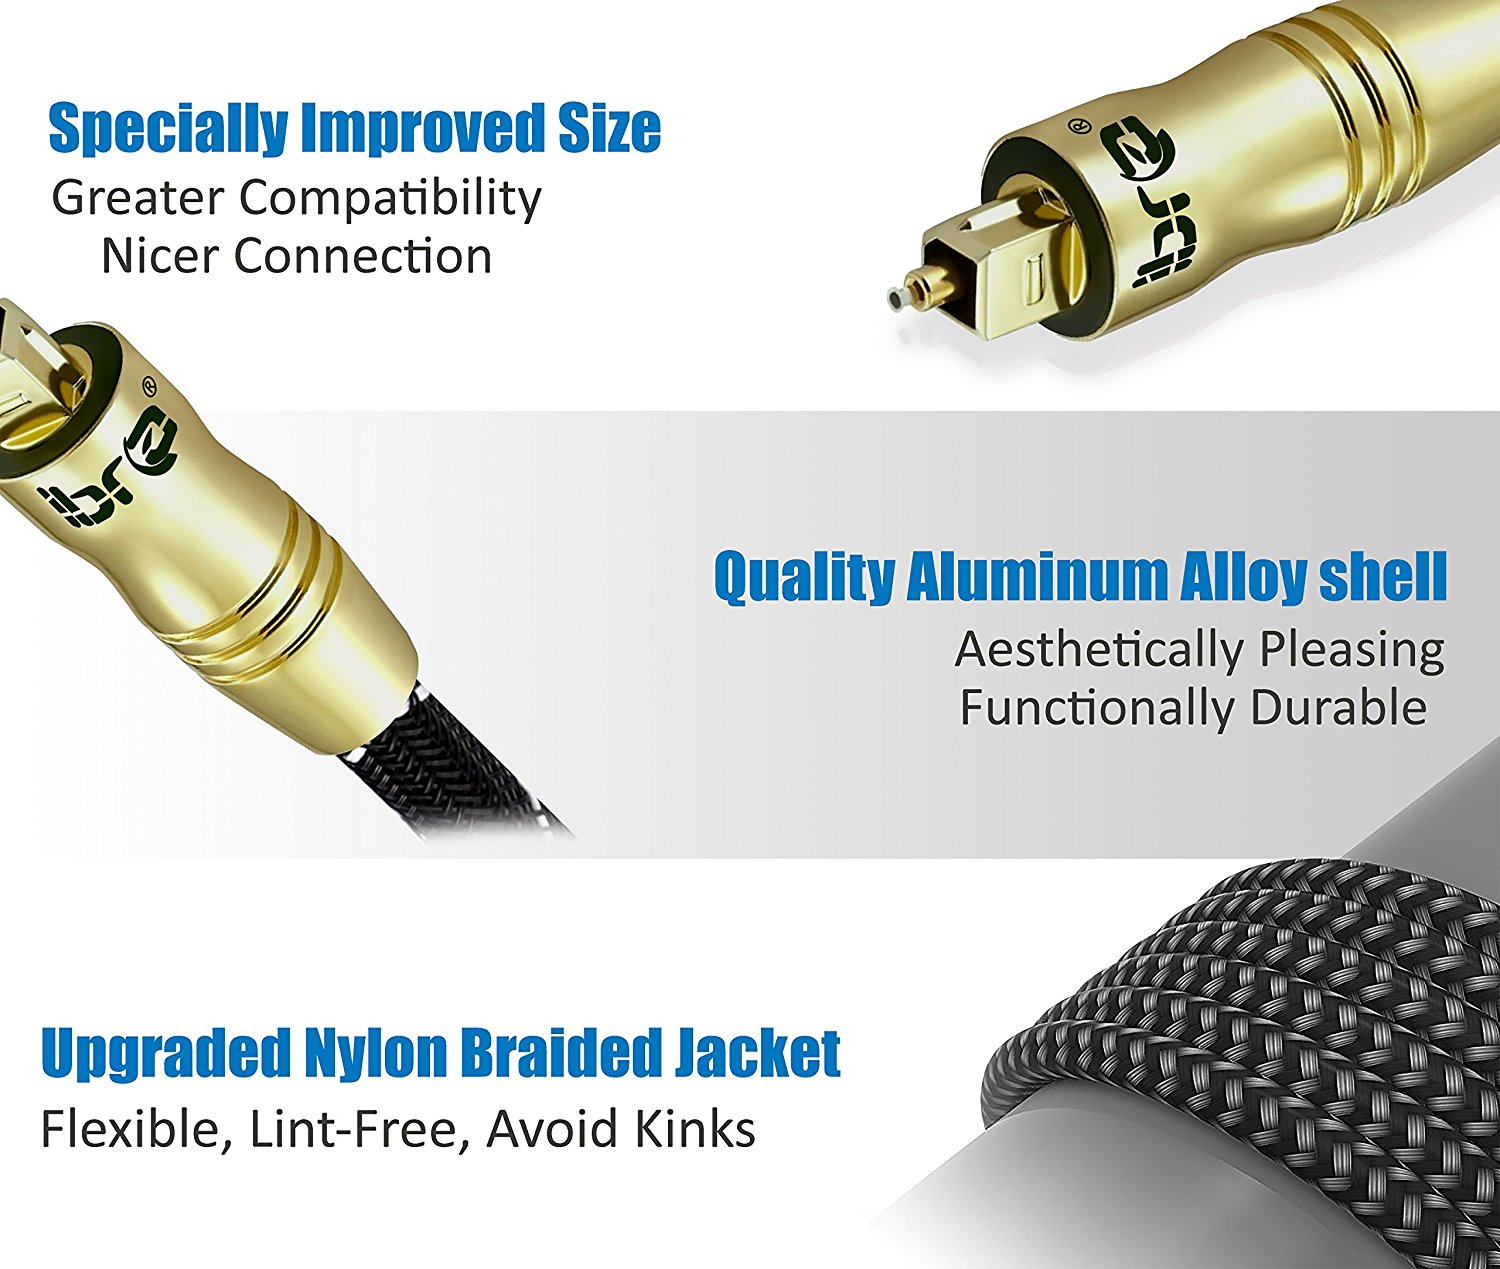 IBRA Black Master 3M - Optical TOSLINK Digital Audio Cable - Fiber Optic Cable - 24K Gold Casing - Compatible with PS3,Sky HD, HDtvs, Blu-rays, AV Amps